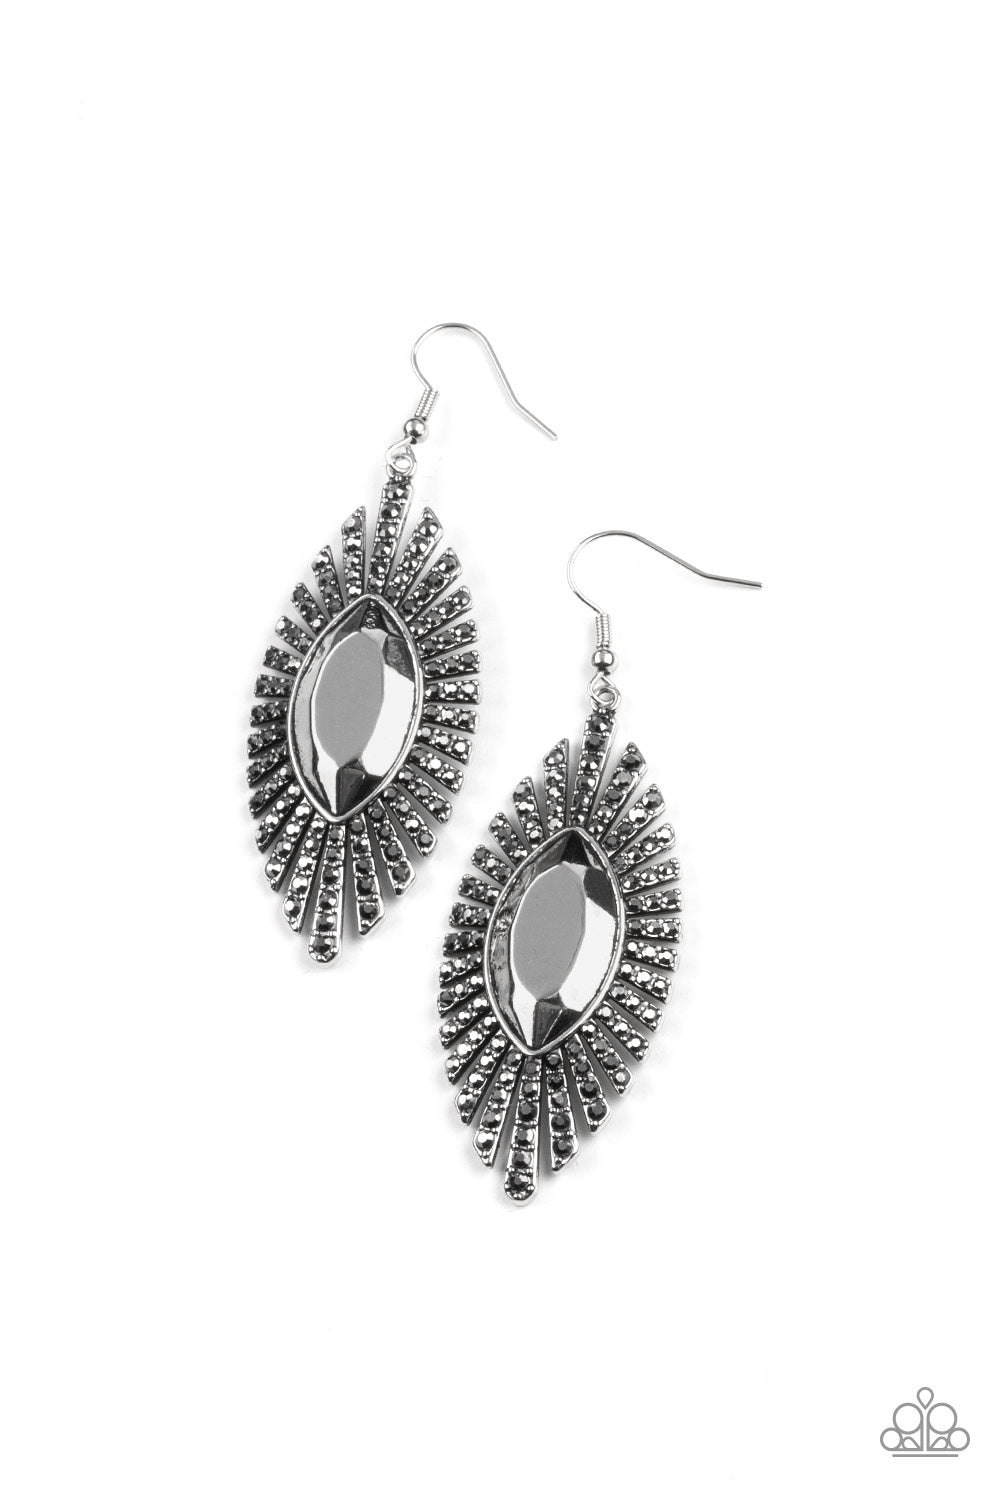 Who Is The FIERCEST Of Them All - Silver Earrings - Princess Glam Shop